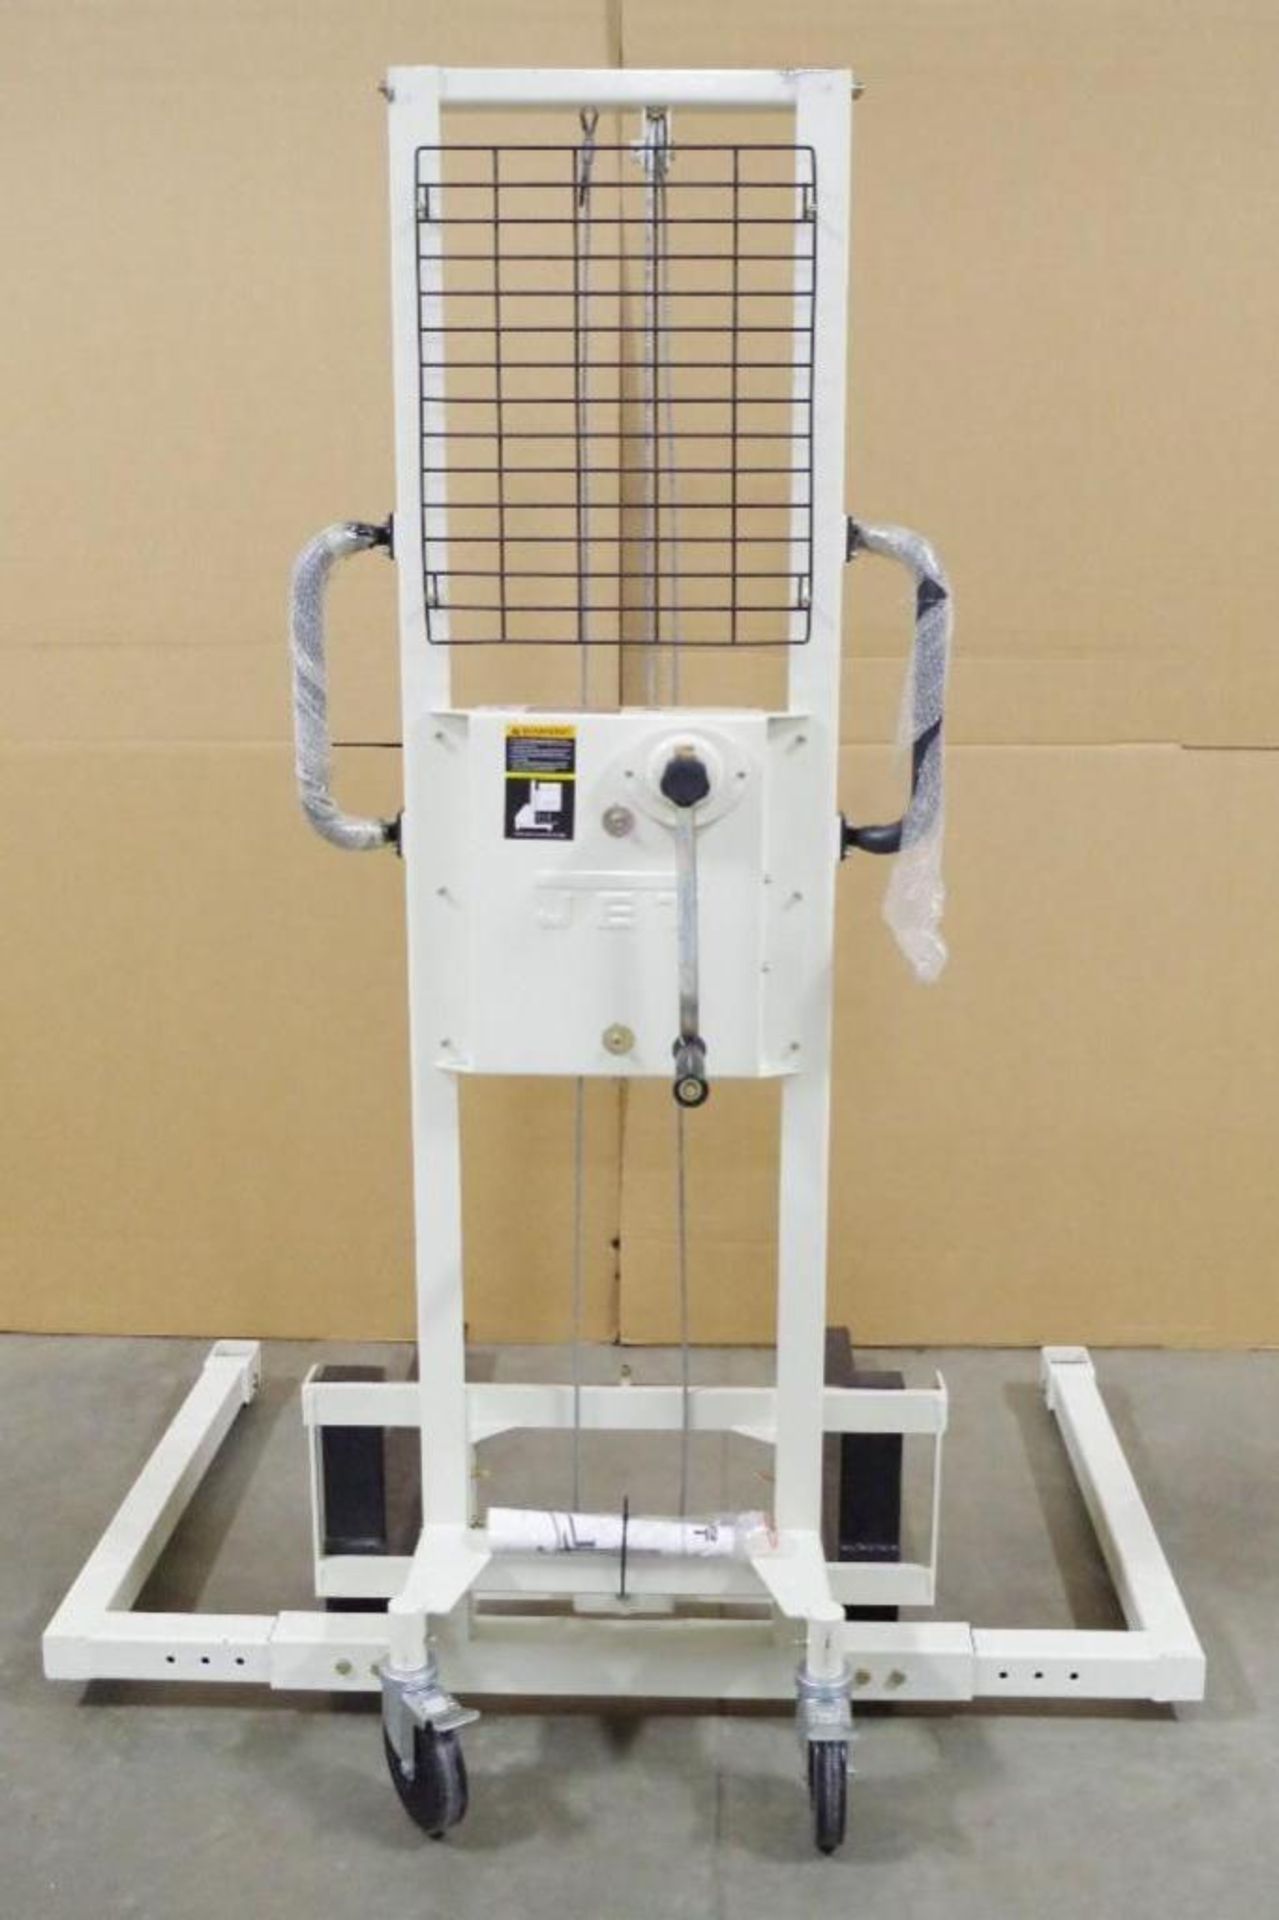 NEW JET Winch Stacker, 770 lbs. Capacity, 59" Lift Height, 18" Load Center - Image 2 of 5